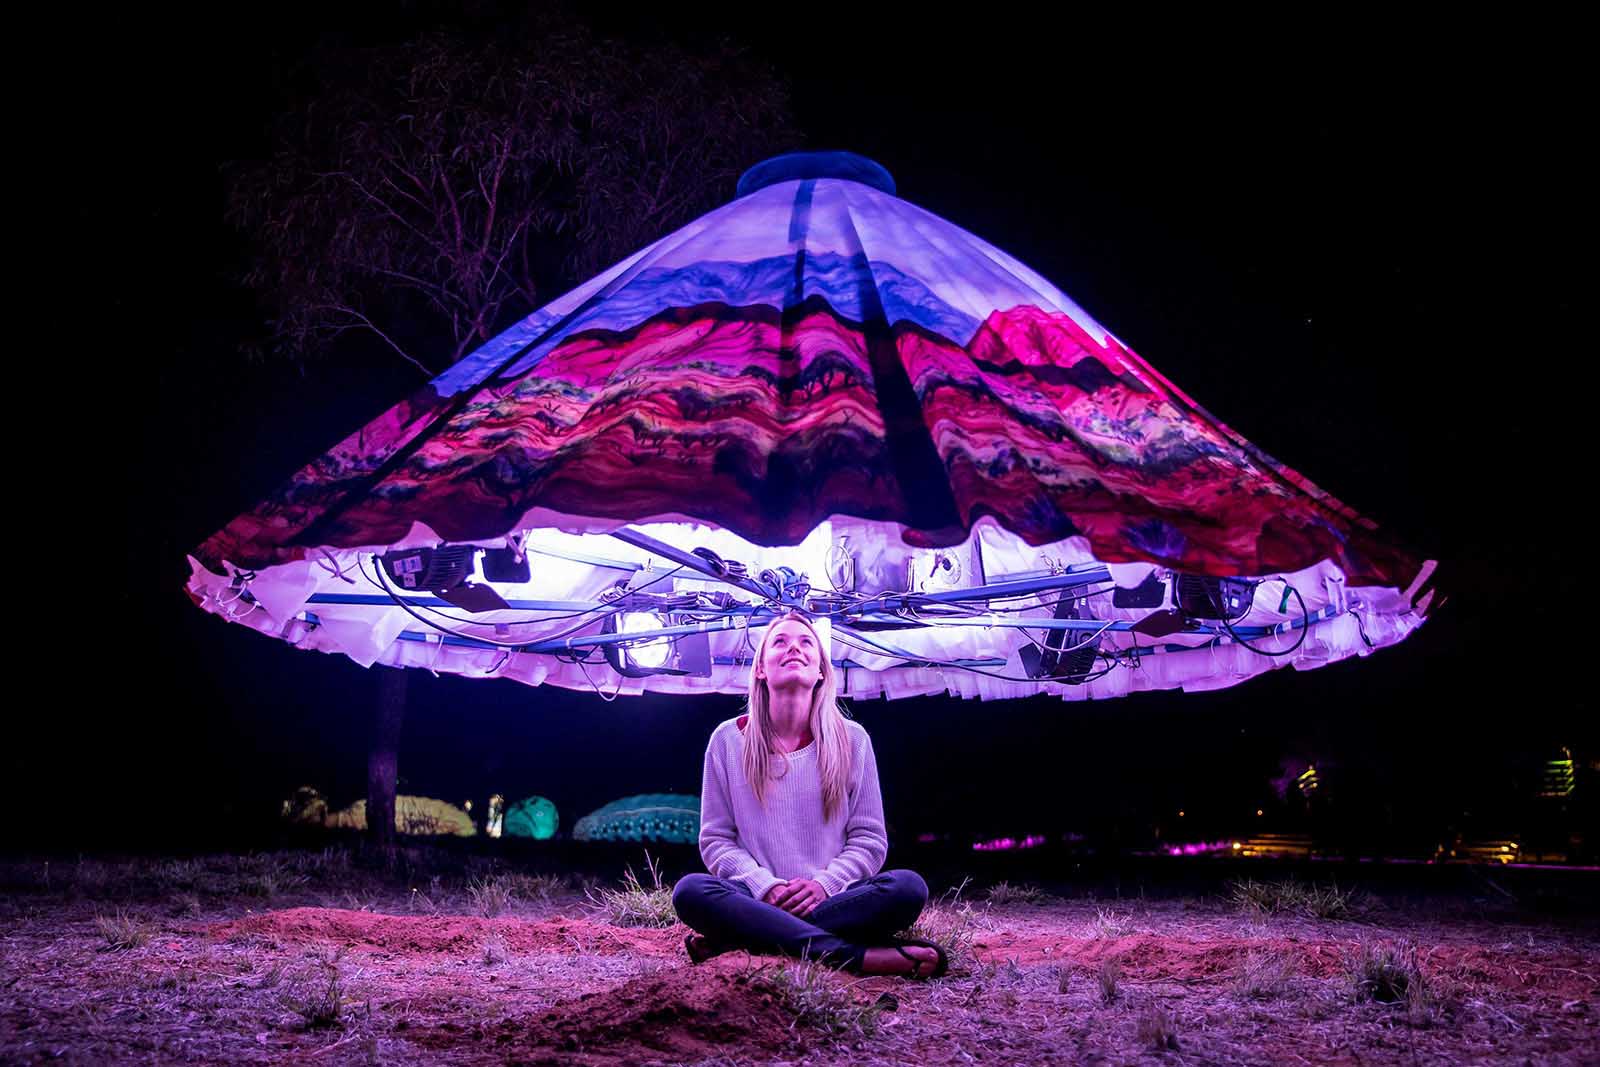 Parrtjima festival of light is an annual event | See Australia's red centre in new light